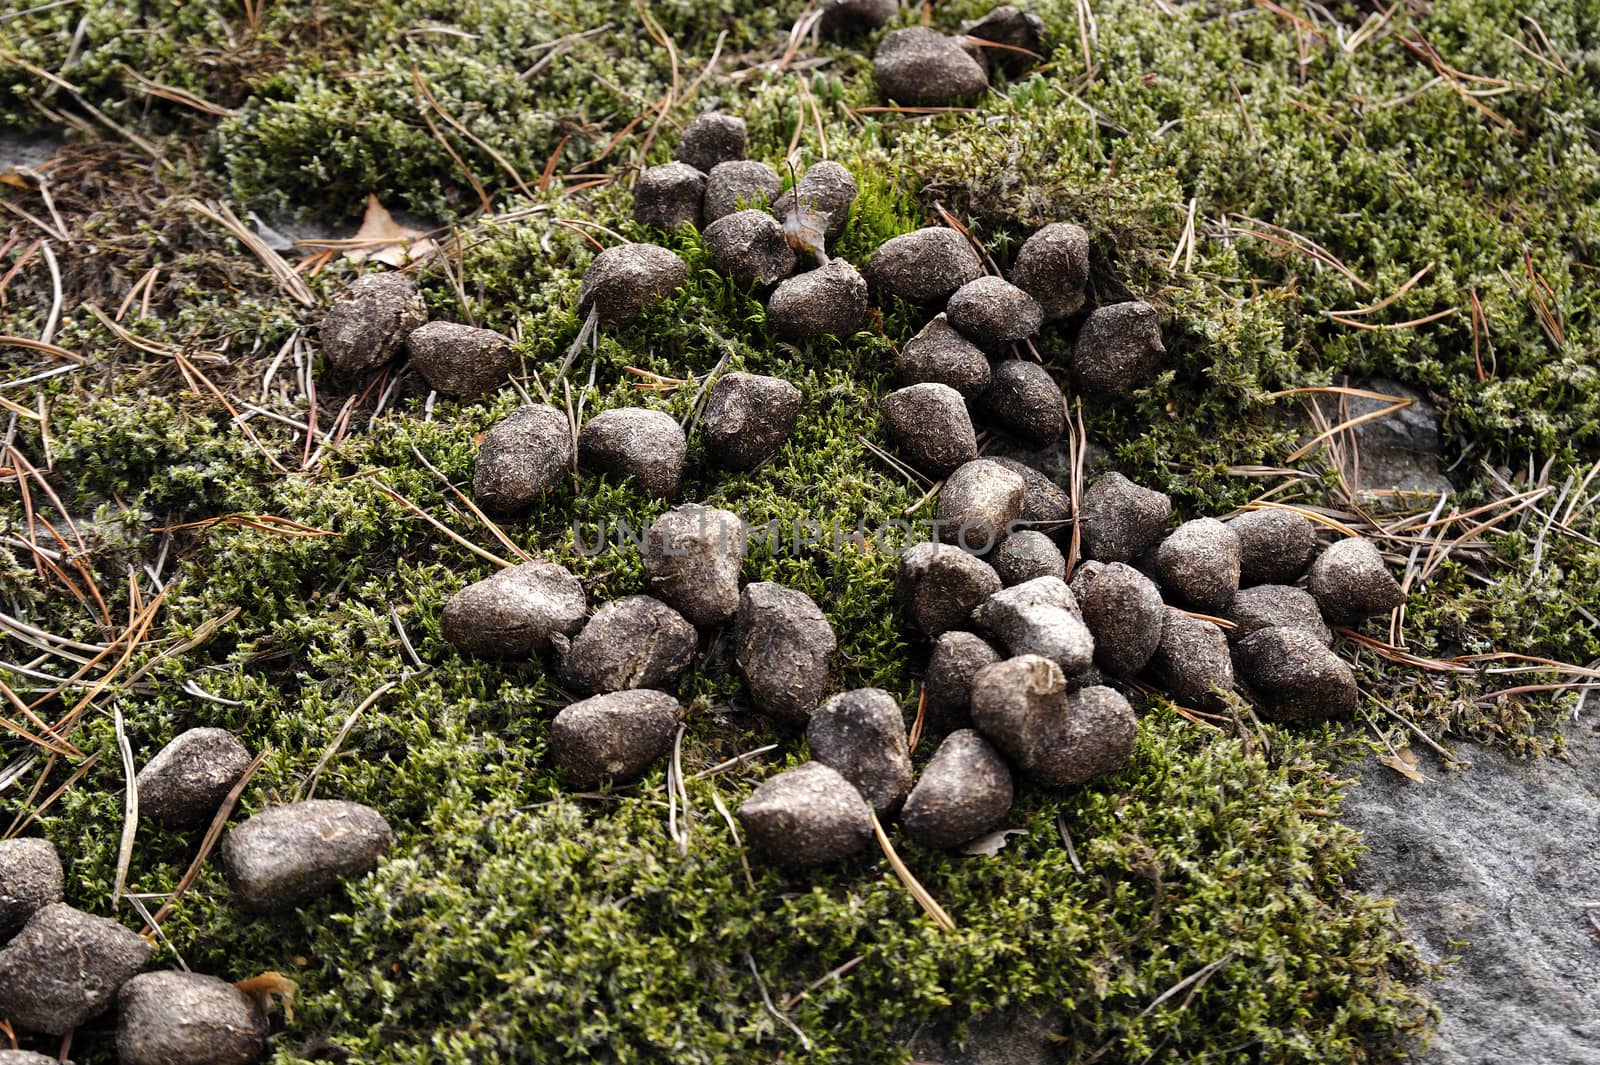 Whitetail deer droppings in the moss.